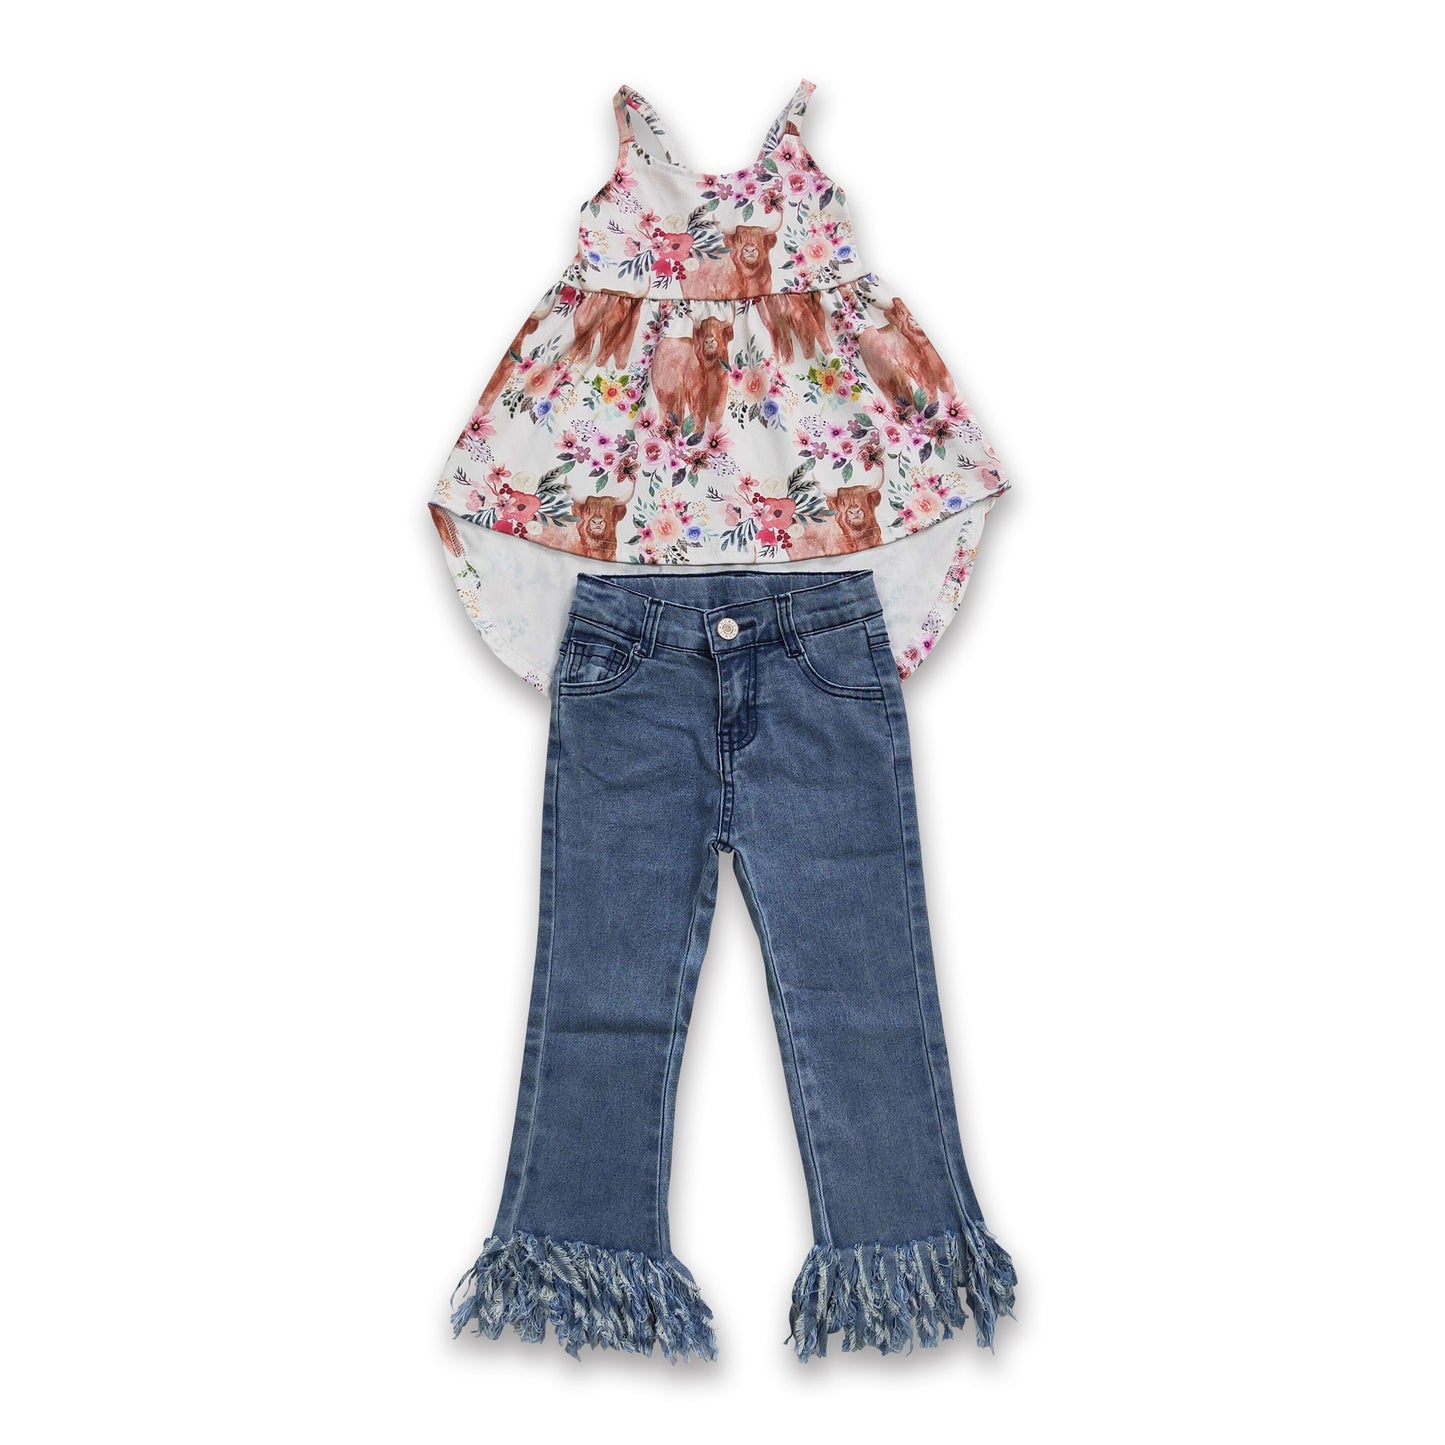 Highland cow top tassels jeans girls clothing set